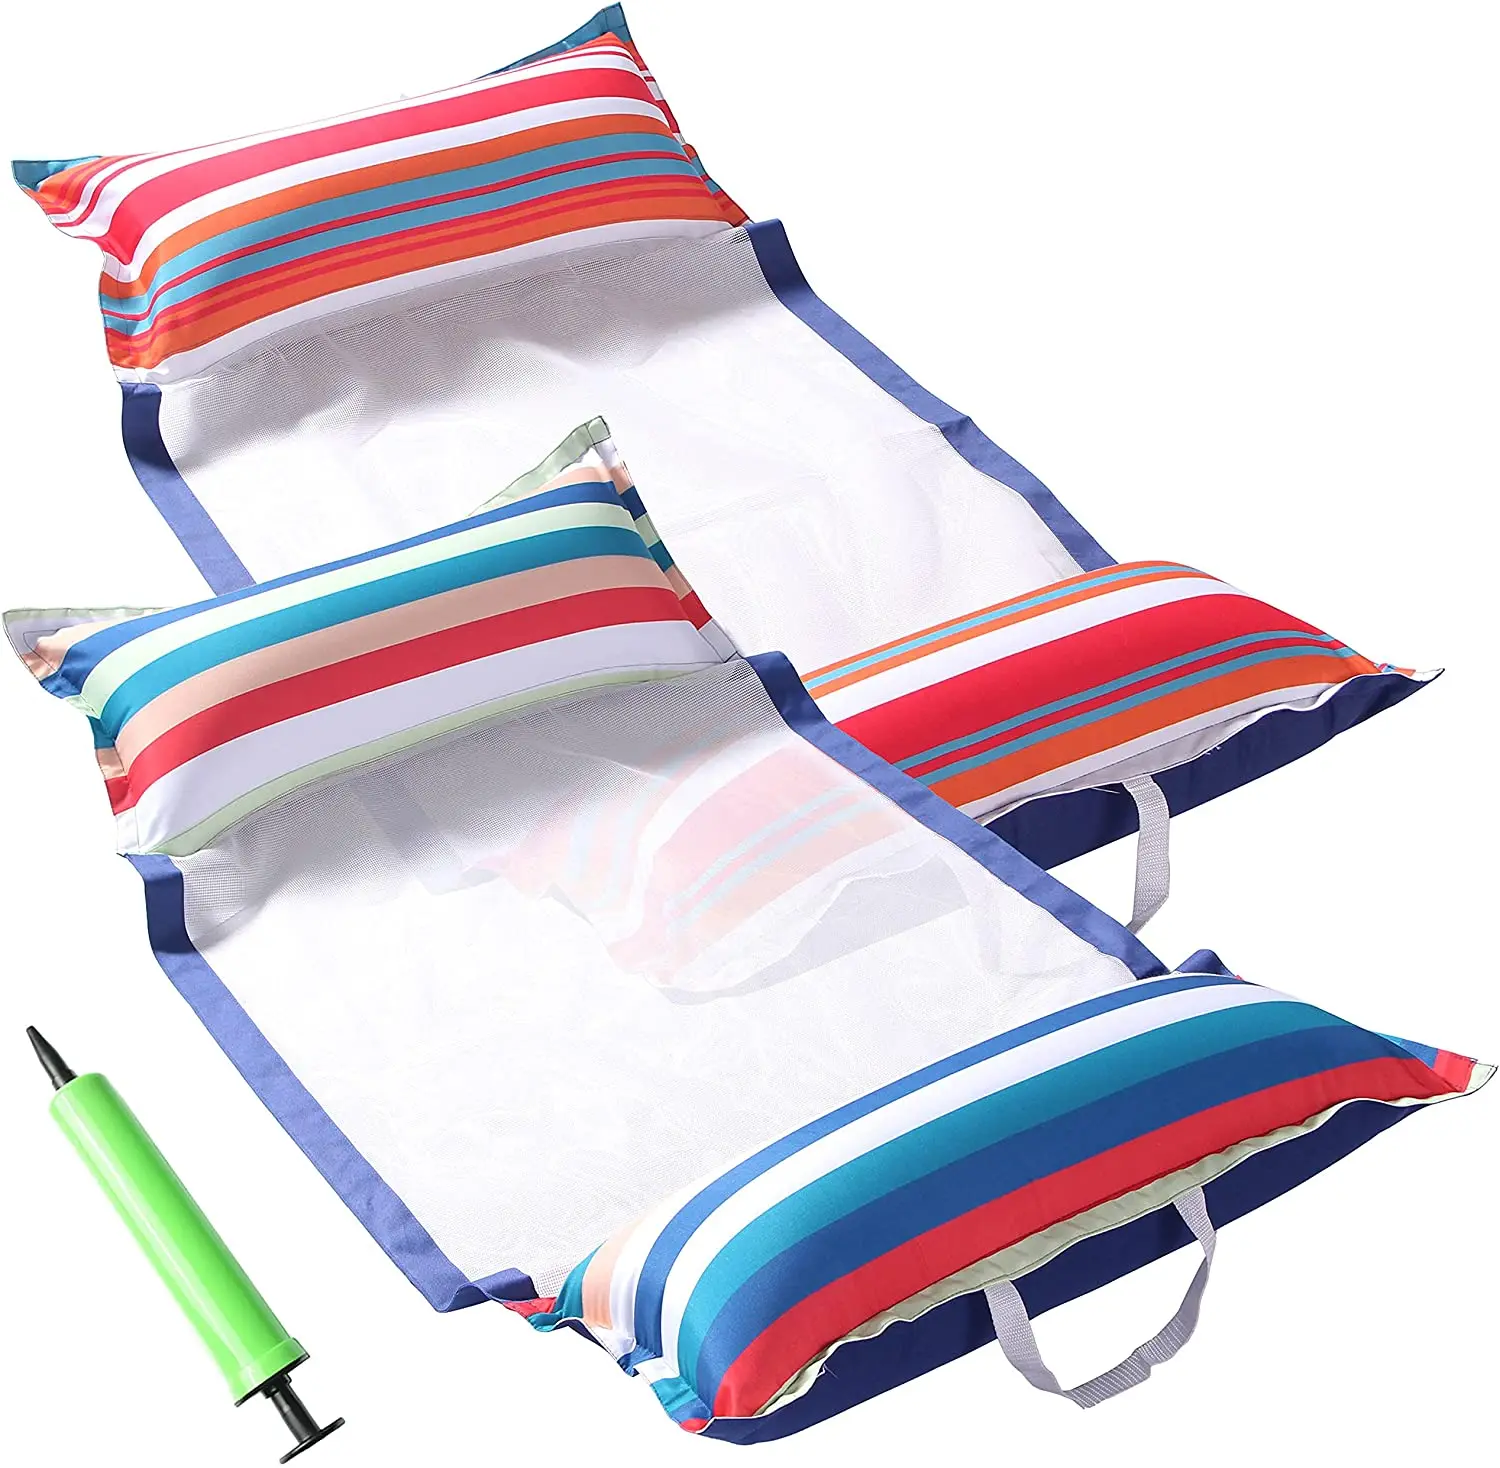 2022 New design Fabric Pool Hammock Floats chair 2 Pack Inflatable Water Hammocks inflatable Pool Float for adults (1600489081642)